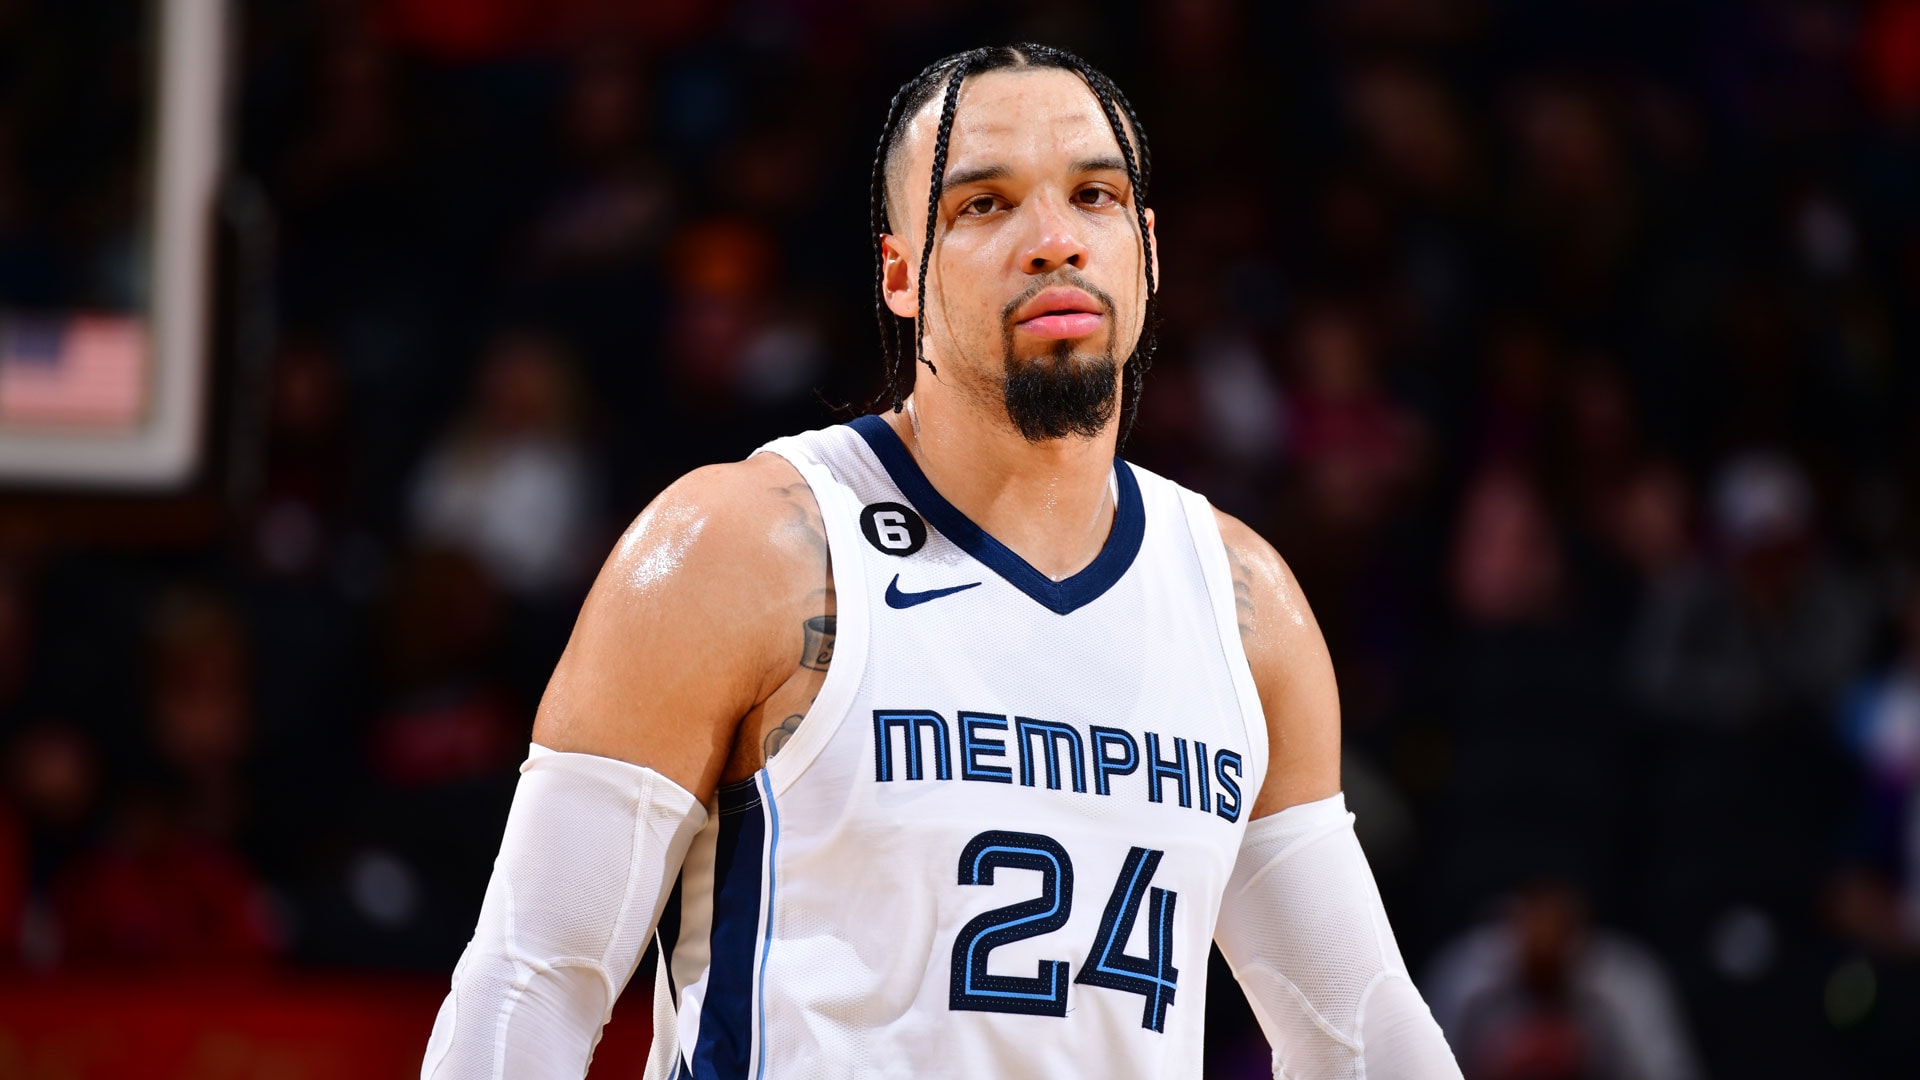 PHOENIX, AZ - JANUARY 22: Dillon Brooks #24 of the Memphis Grizzlies looks on during the game against the Phoenix Suns on January 22, 2023 at Footprint Center in Phoenix, Arizona.